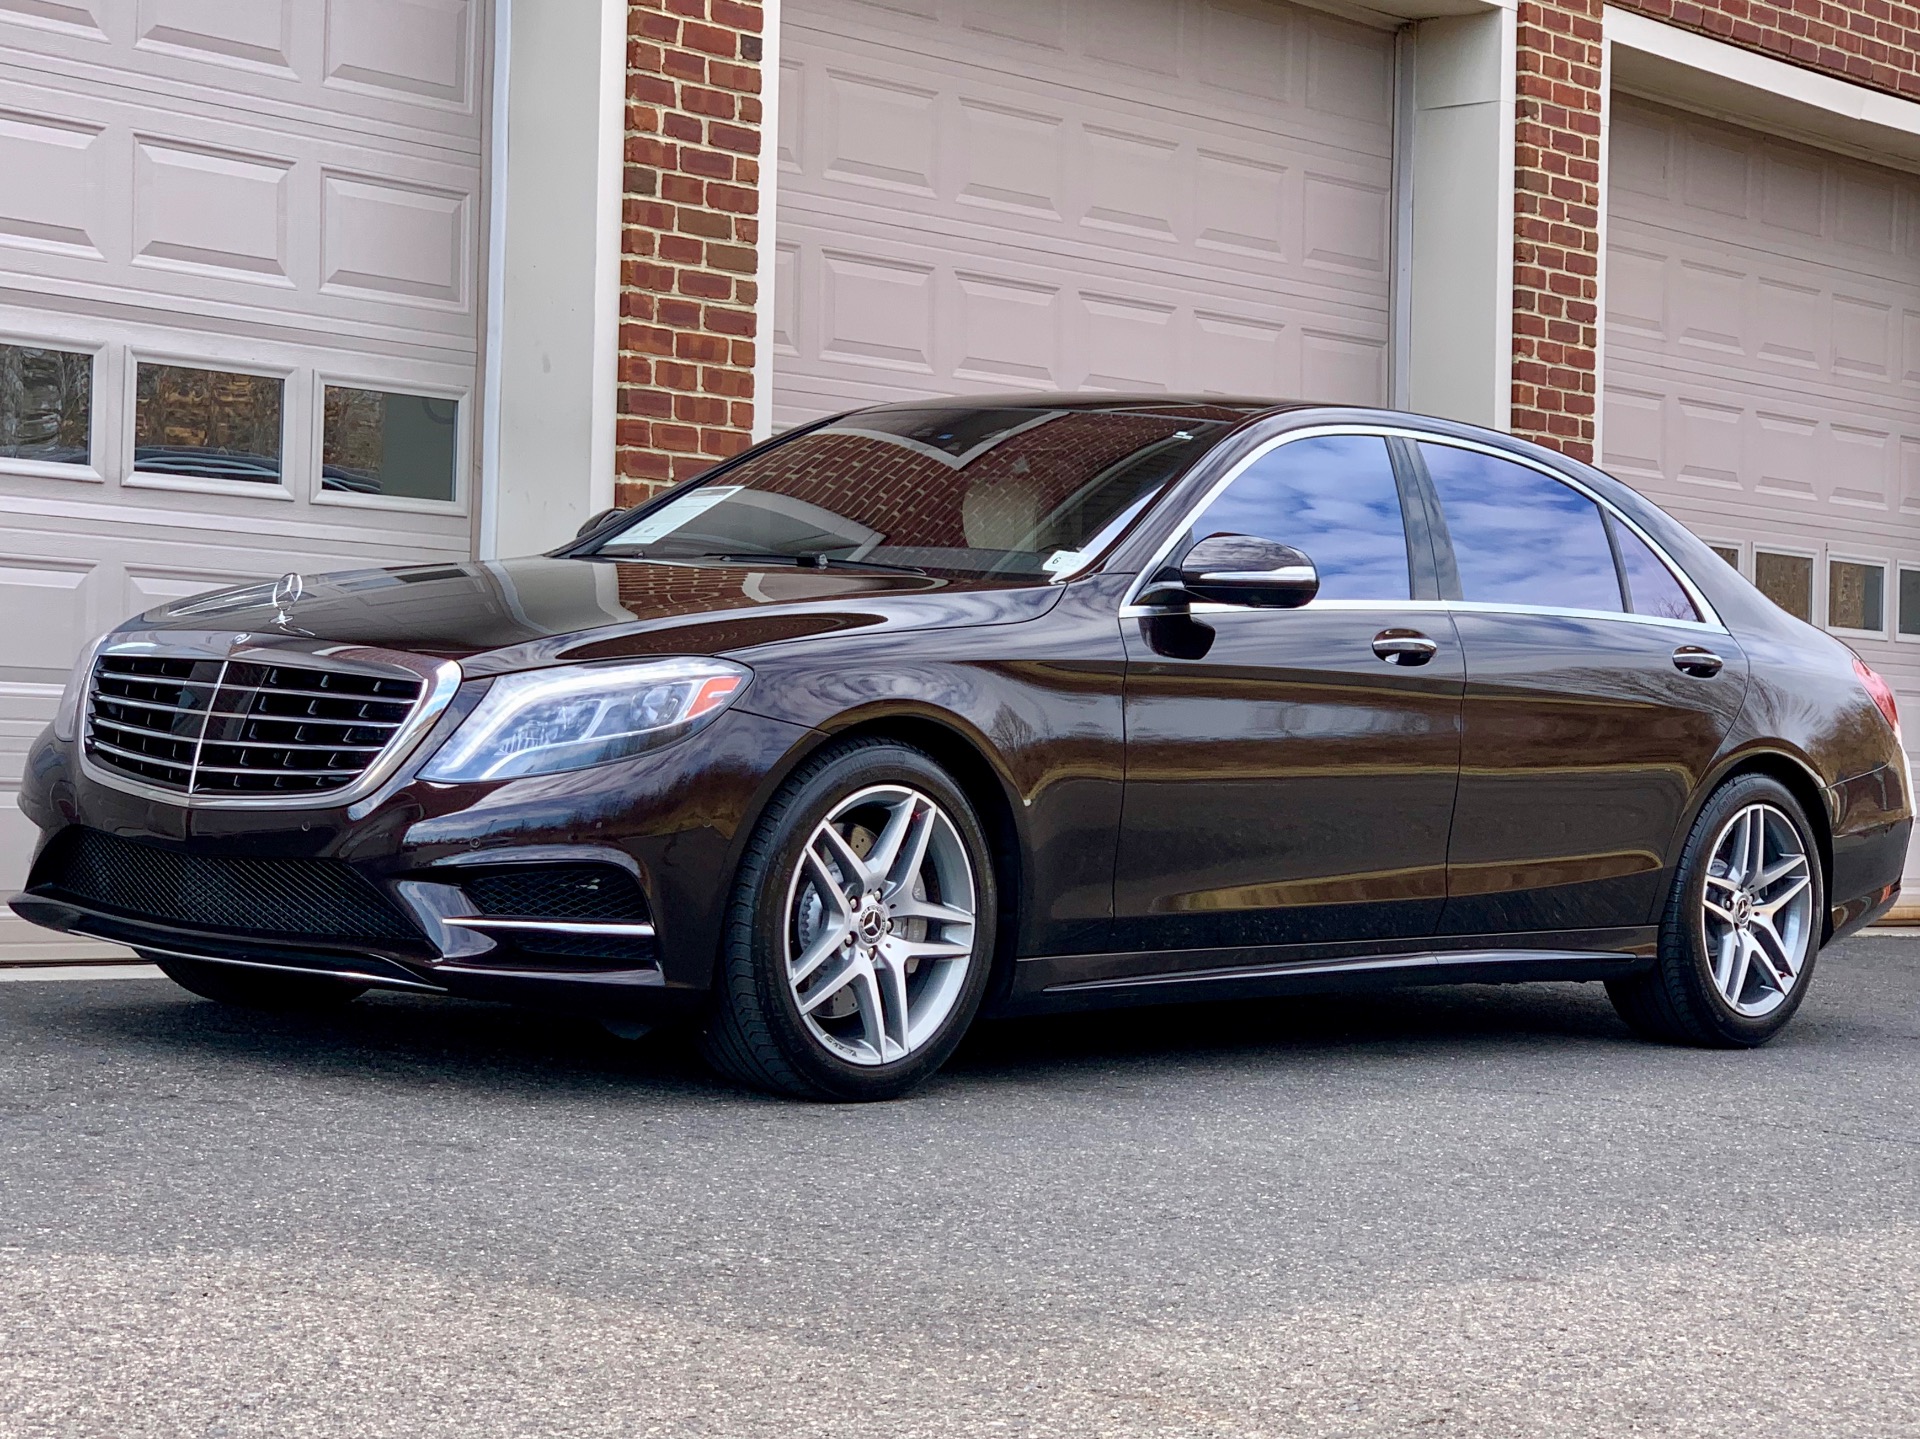 Used-2017-Mercedes-Benz-S-Class-S-550-4MATIC